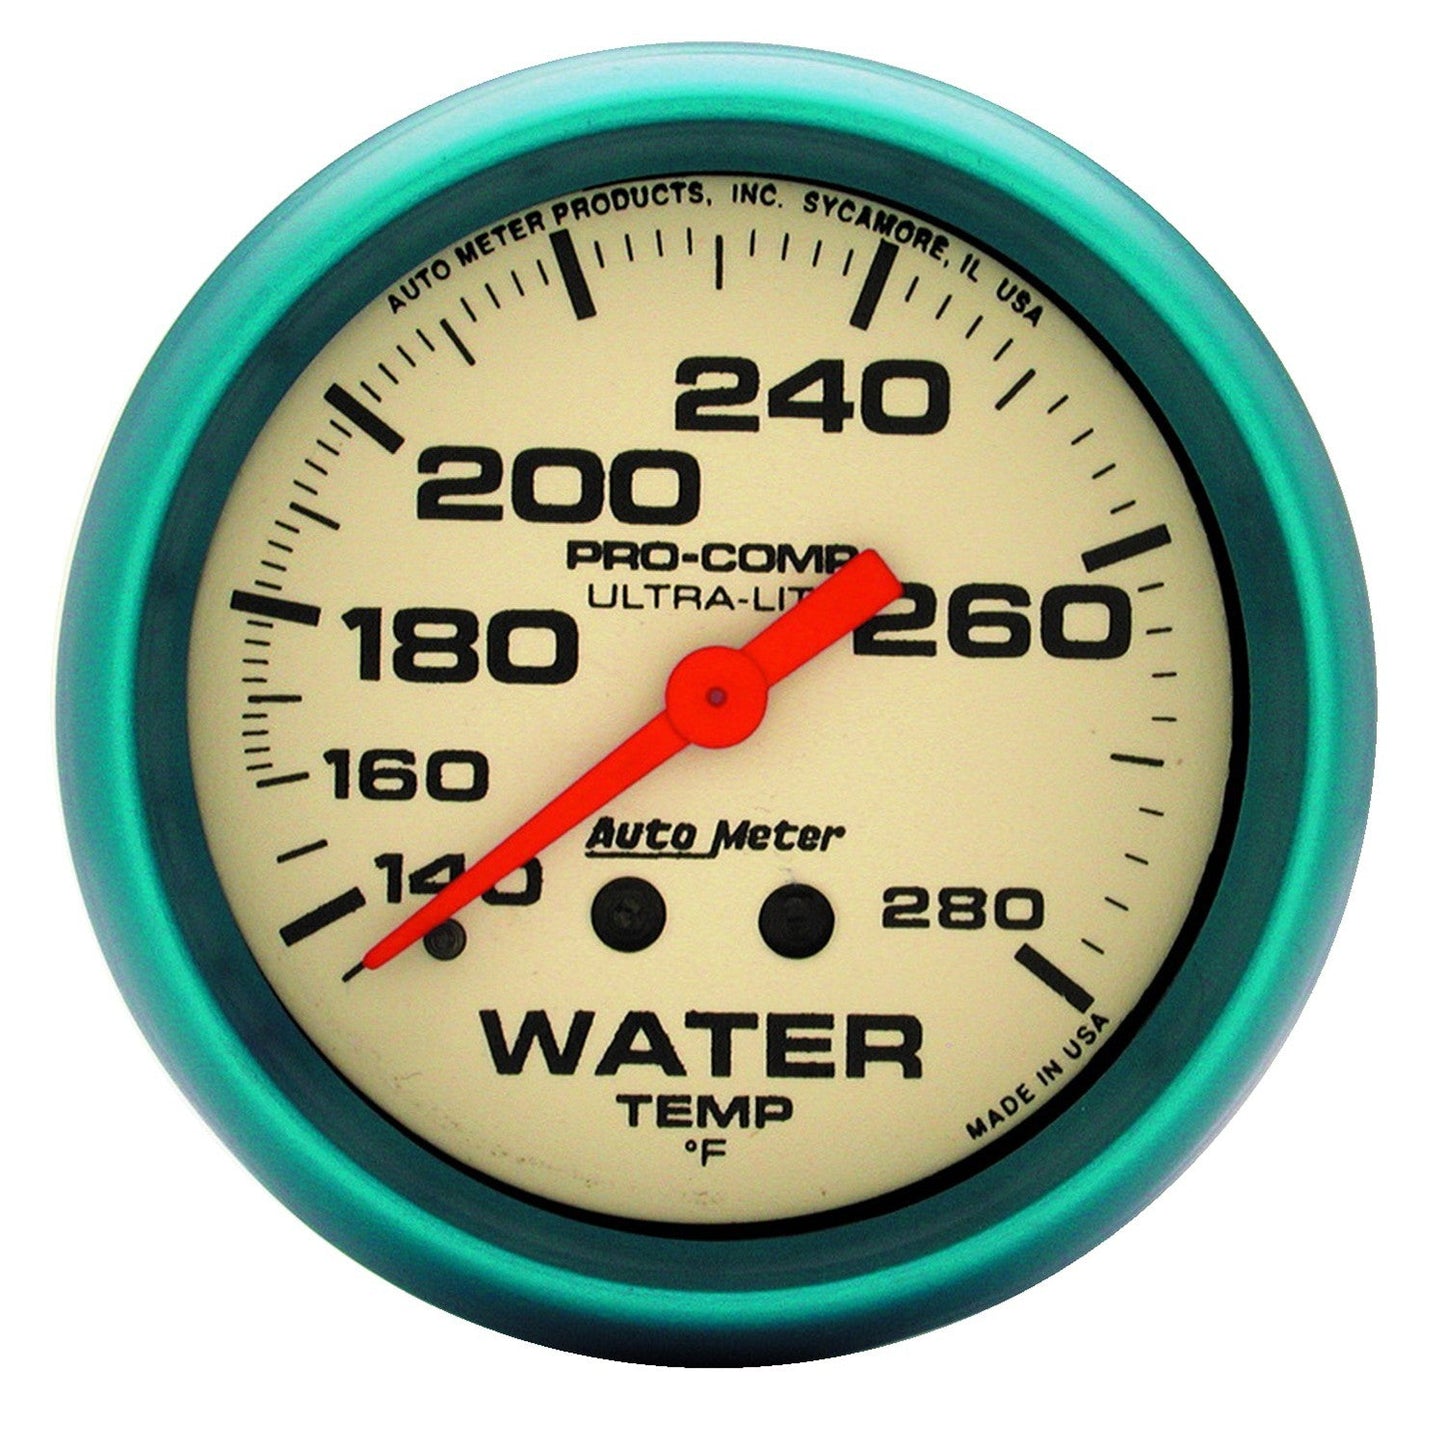 AutoMeter - 2-5/8" WATER TEMPERATURE, 140-280 °F, 4 FT., MECHANICAL, ULTRA-NITE (4535)